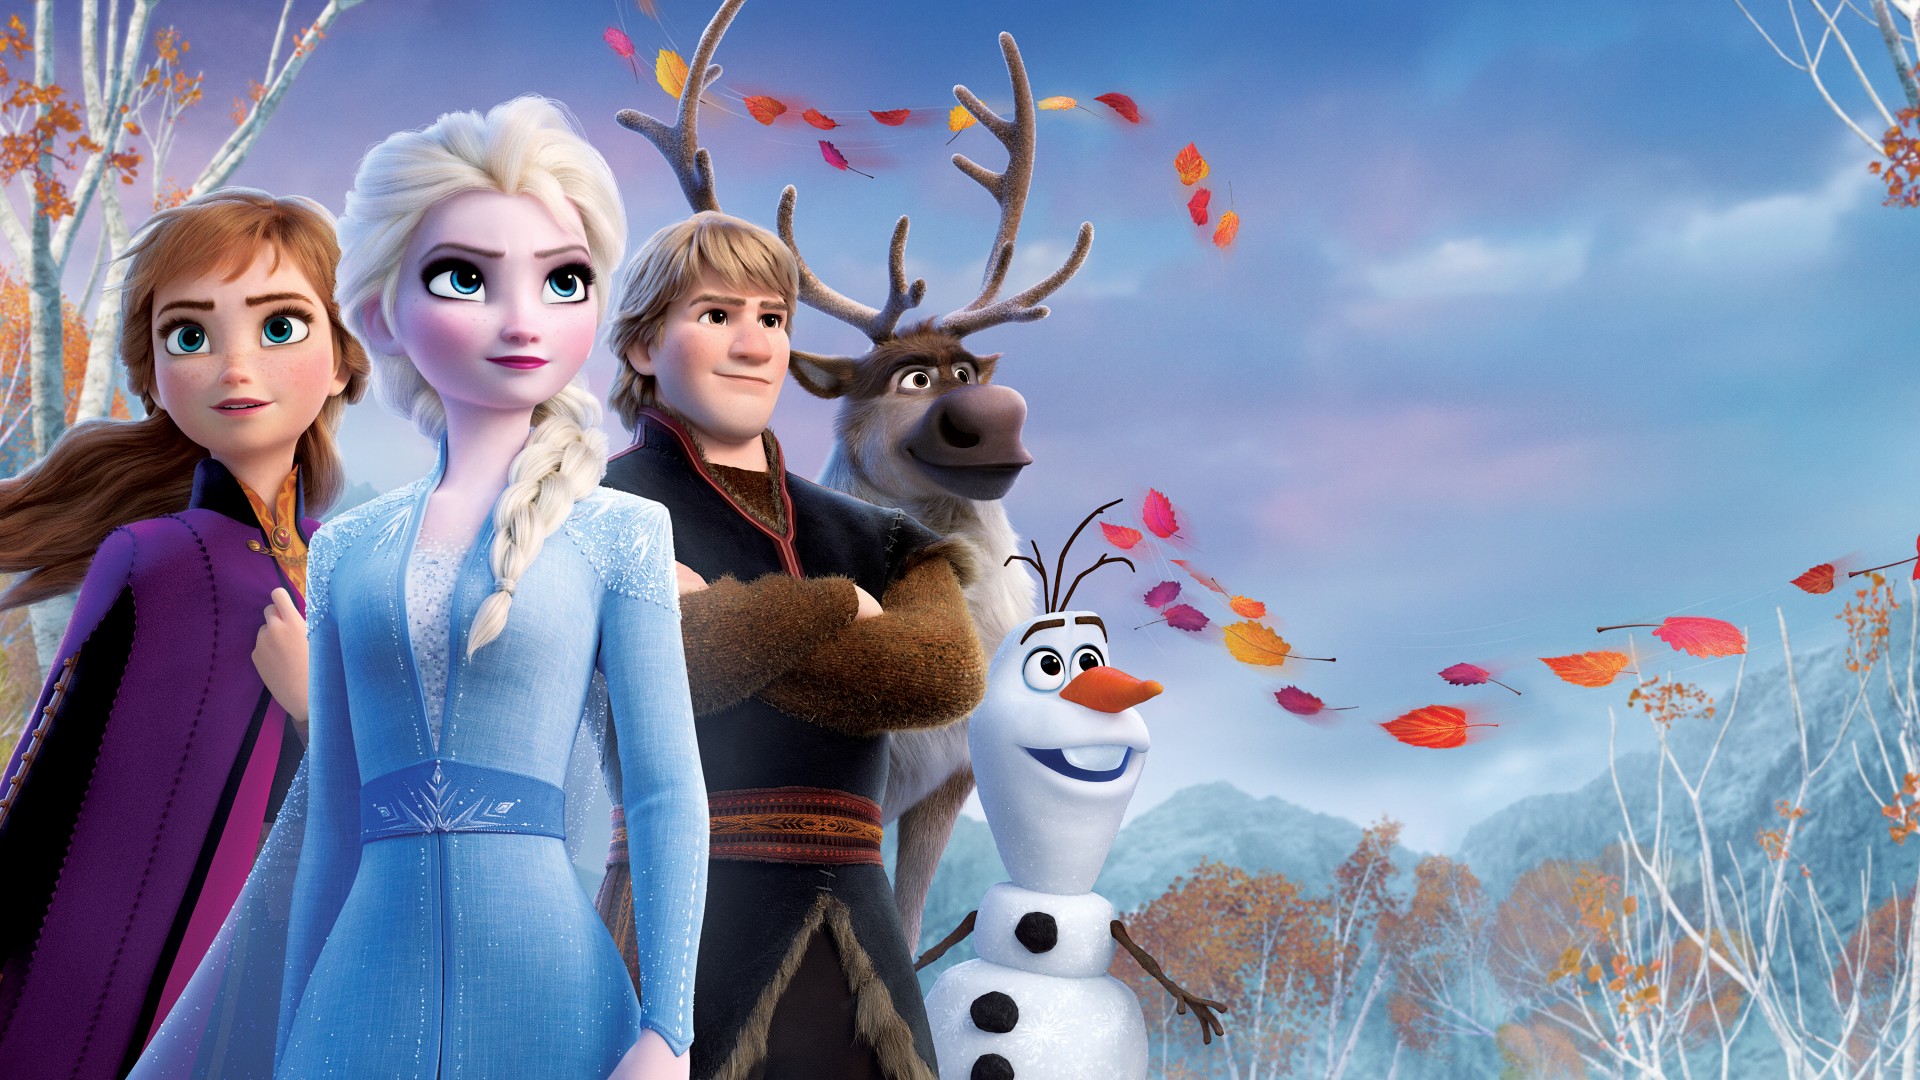 Frozen 3 Story Details and Rumors